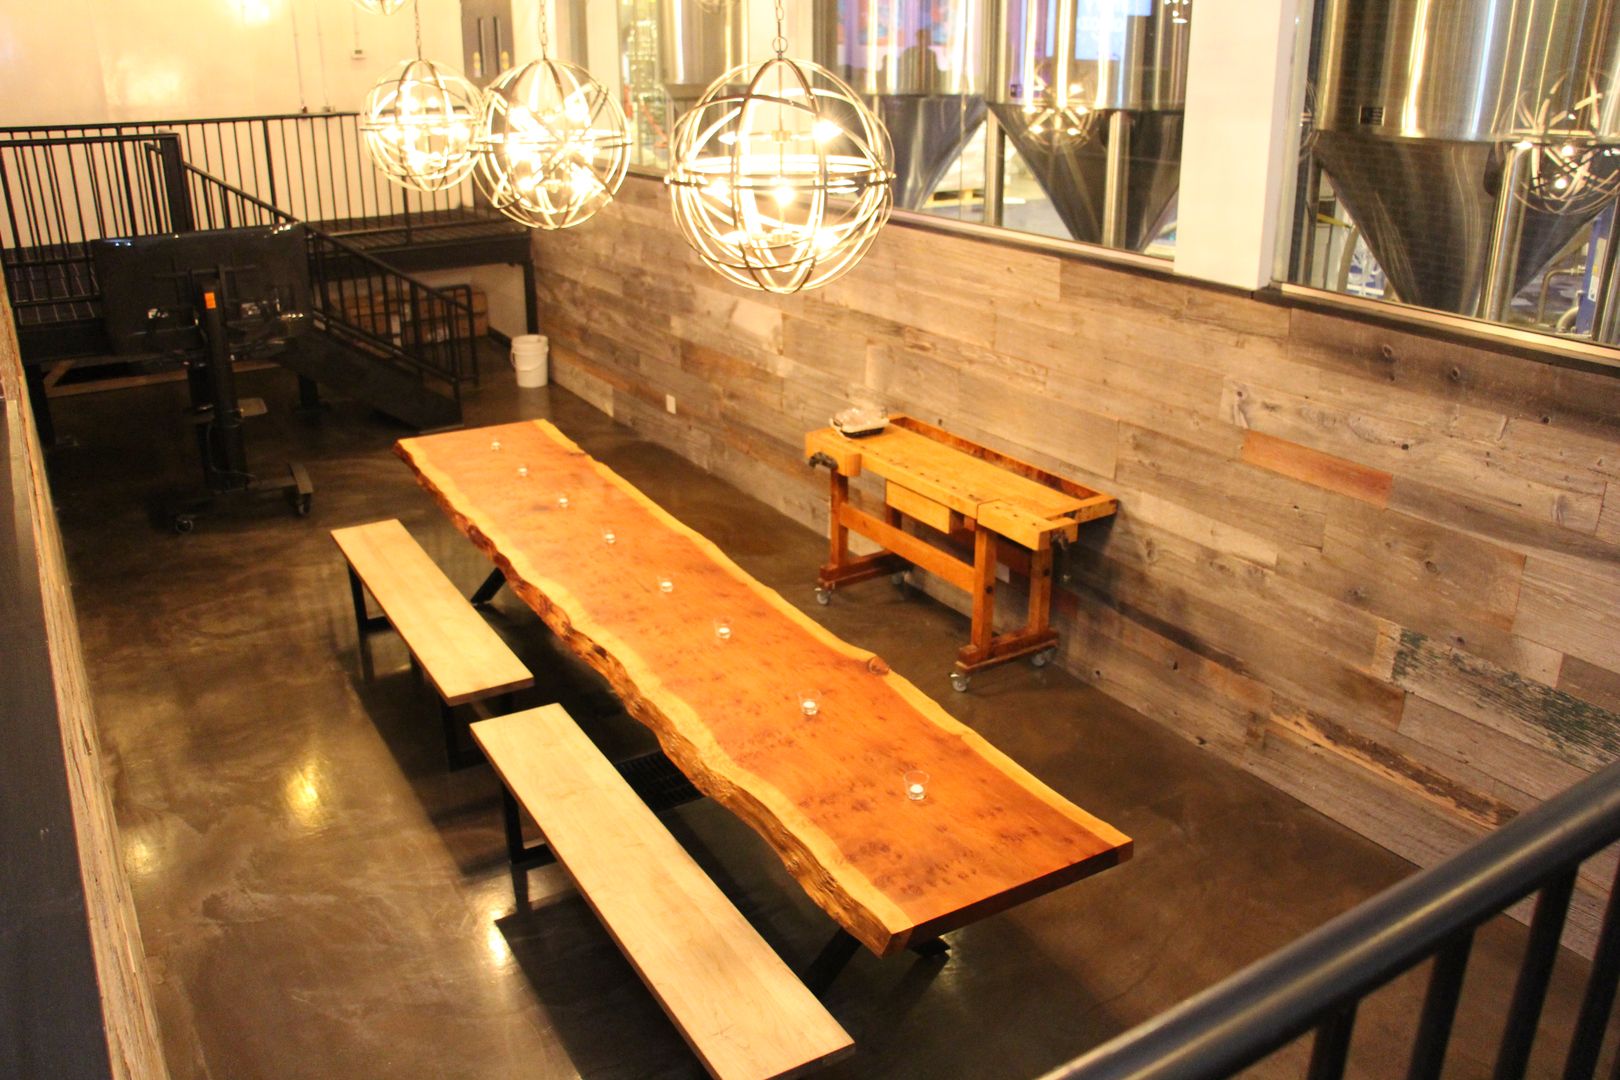 Beirworks, Dining Area and Beer Tasting Room